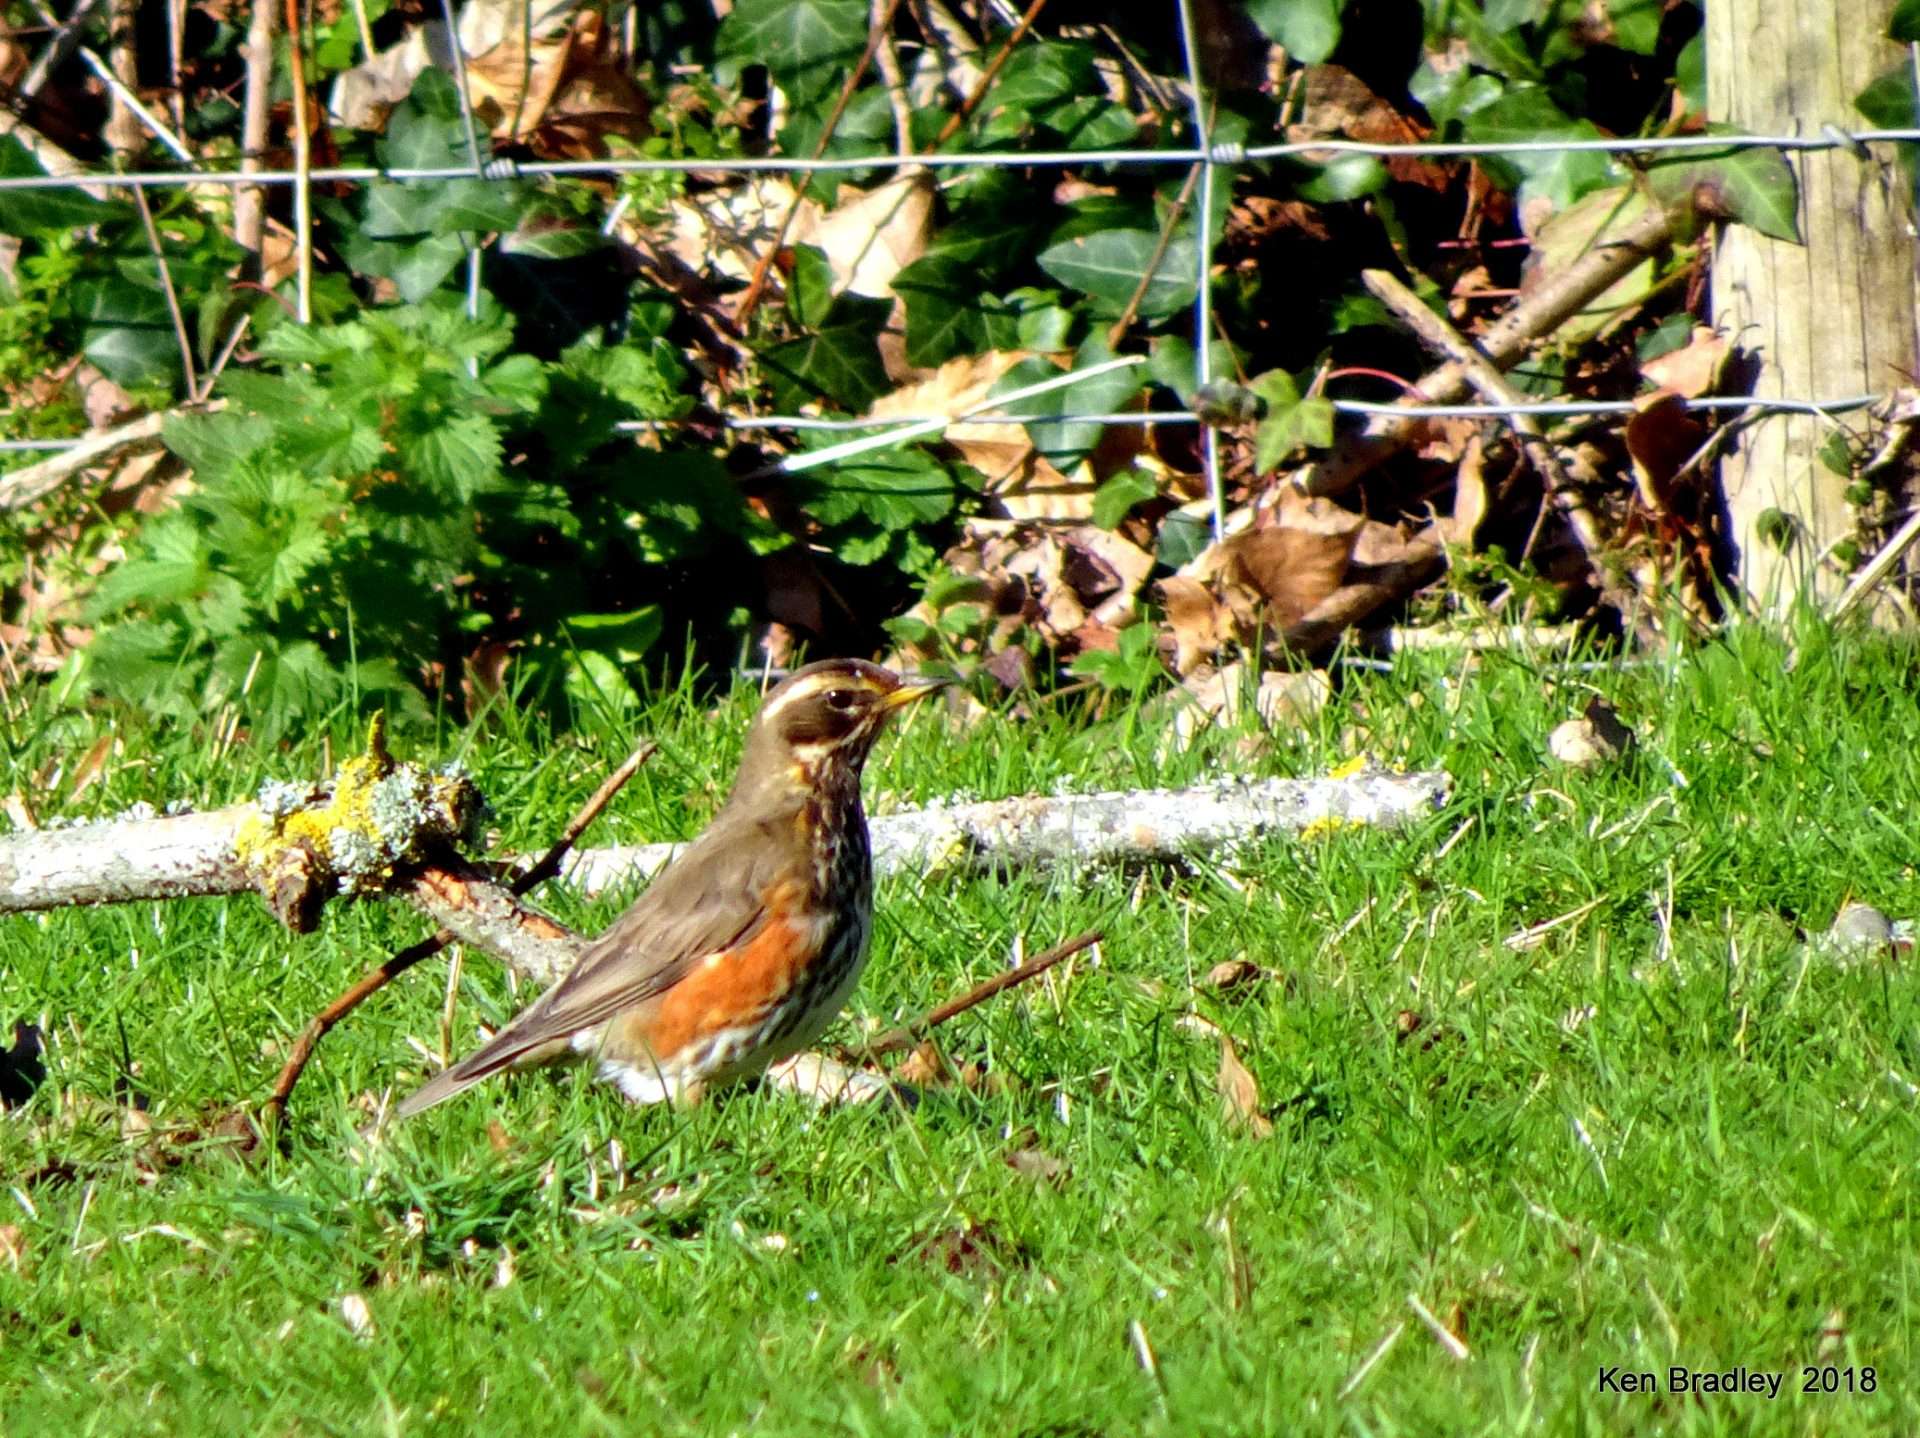 Redwing by Kenneth Bradley at Parke National Trust